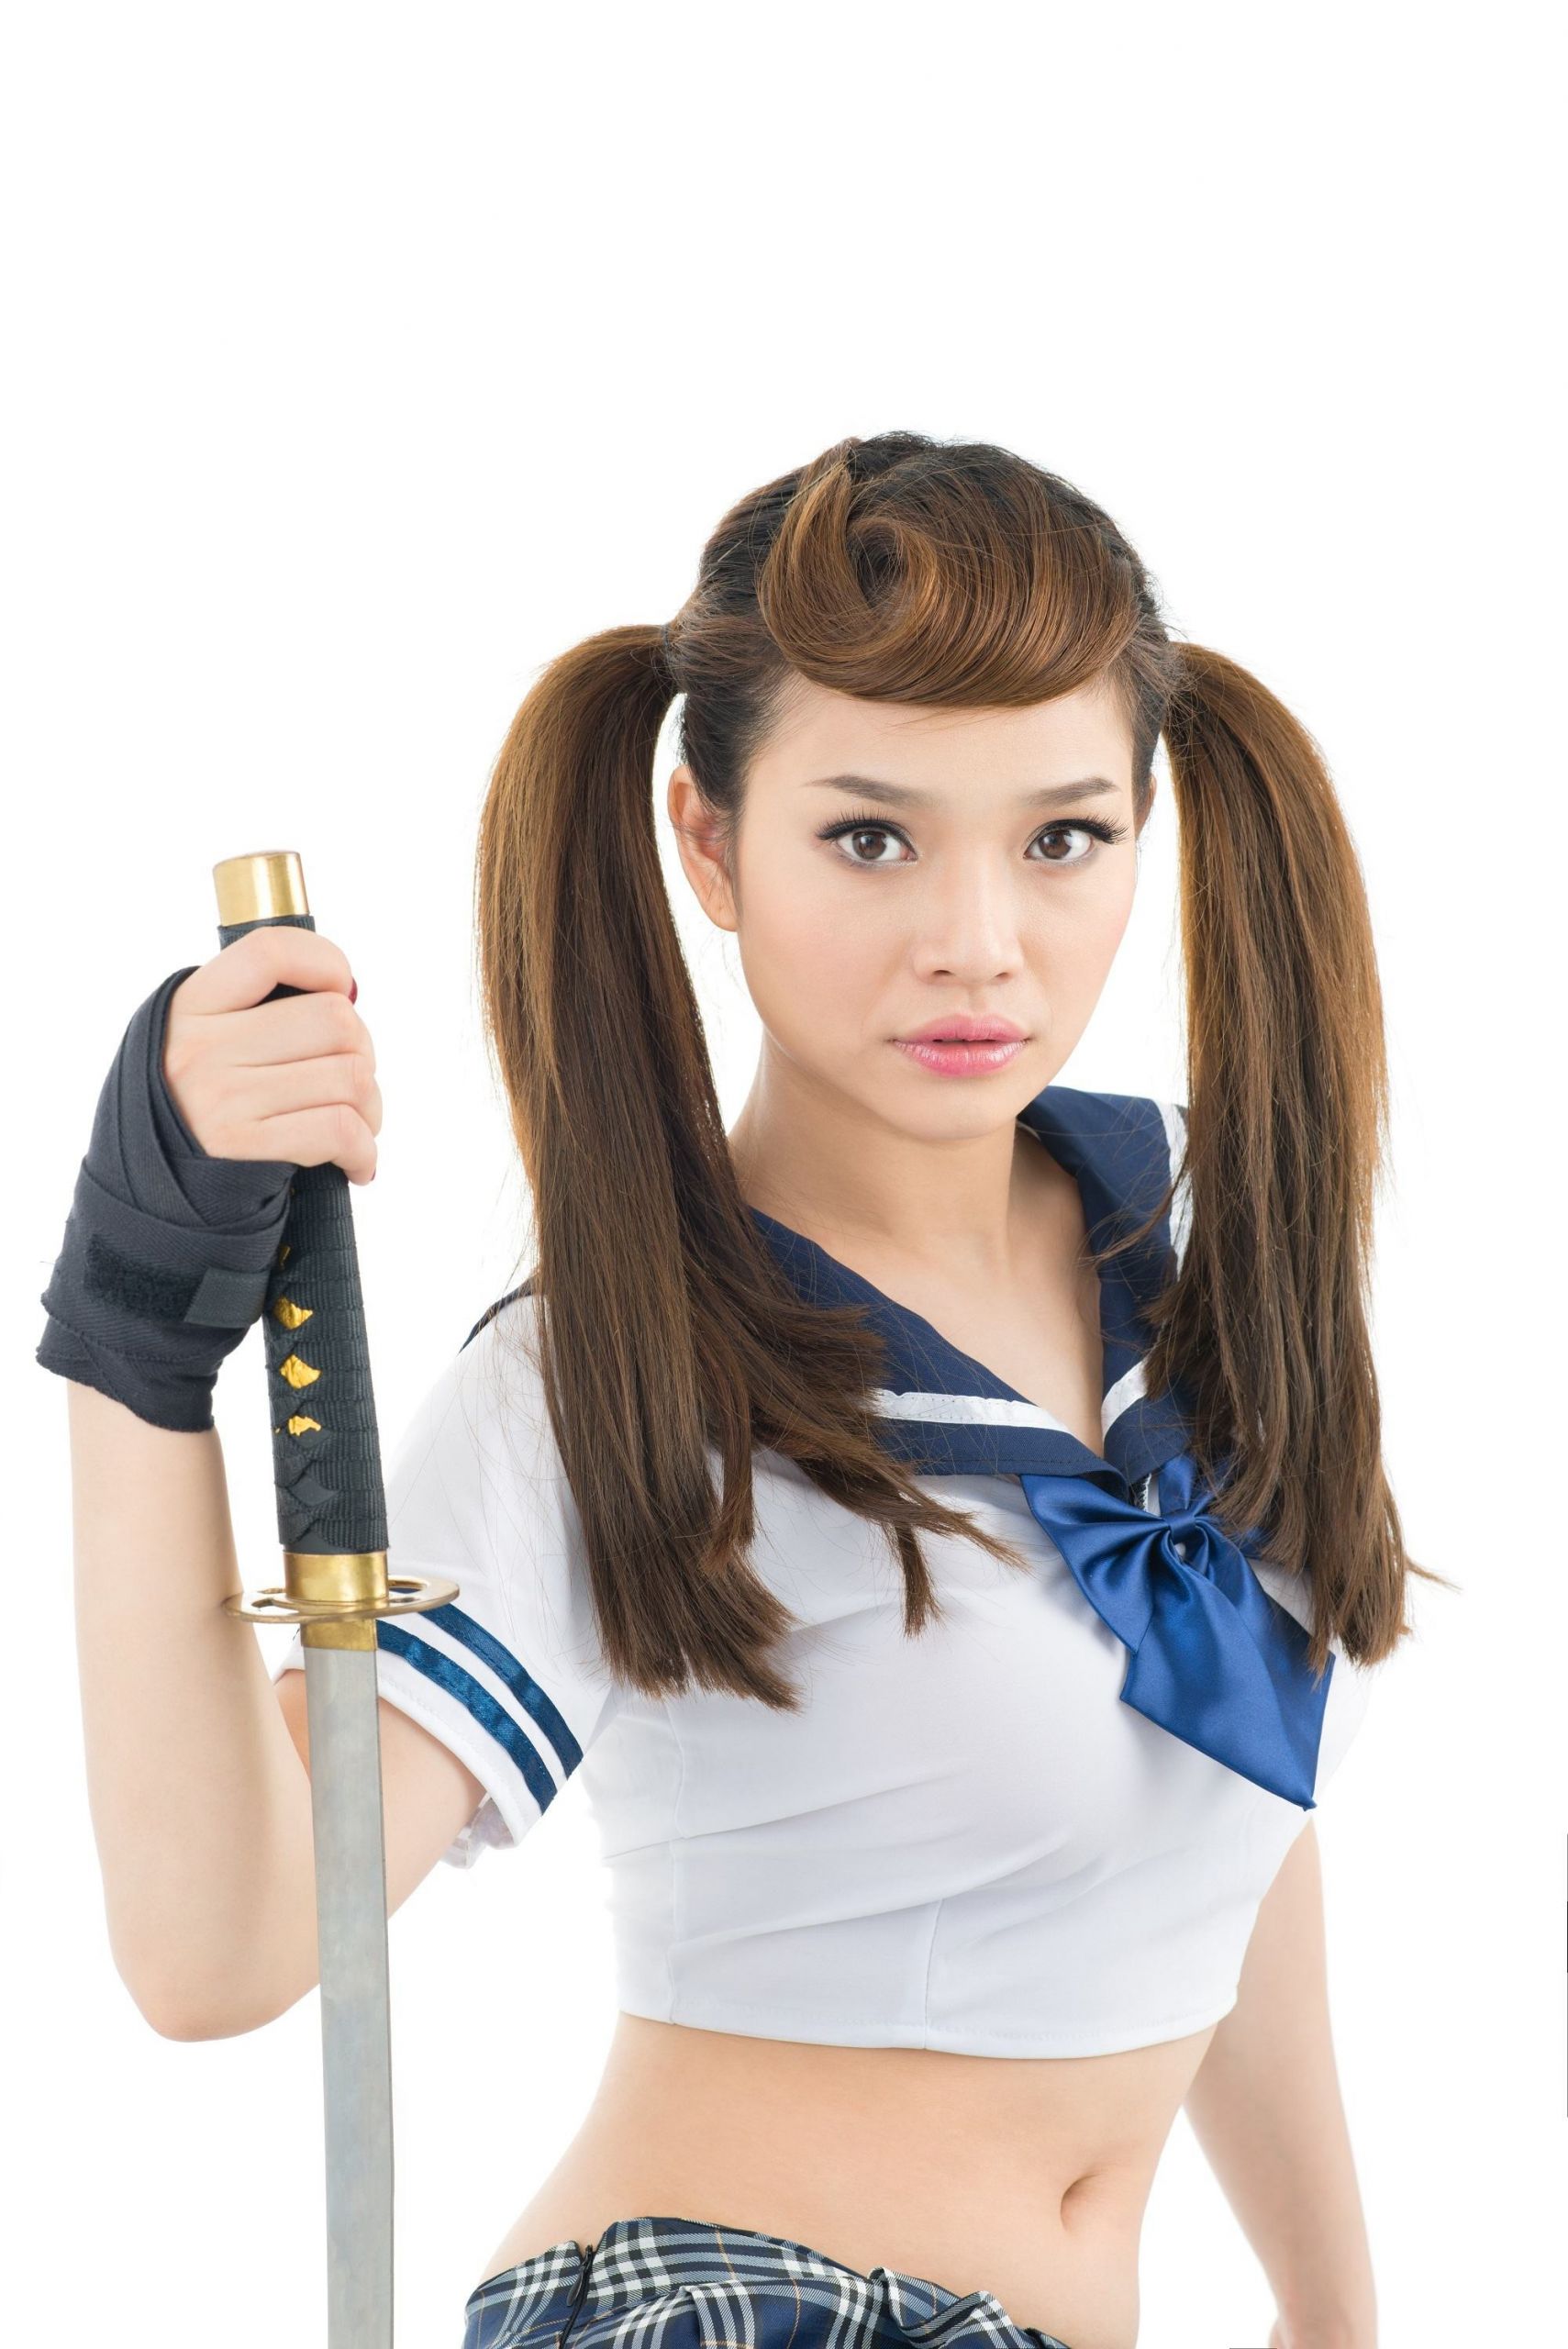 Anime Pigtails Hairstyles
 Anime hairstyles for a fun Halloween look